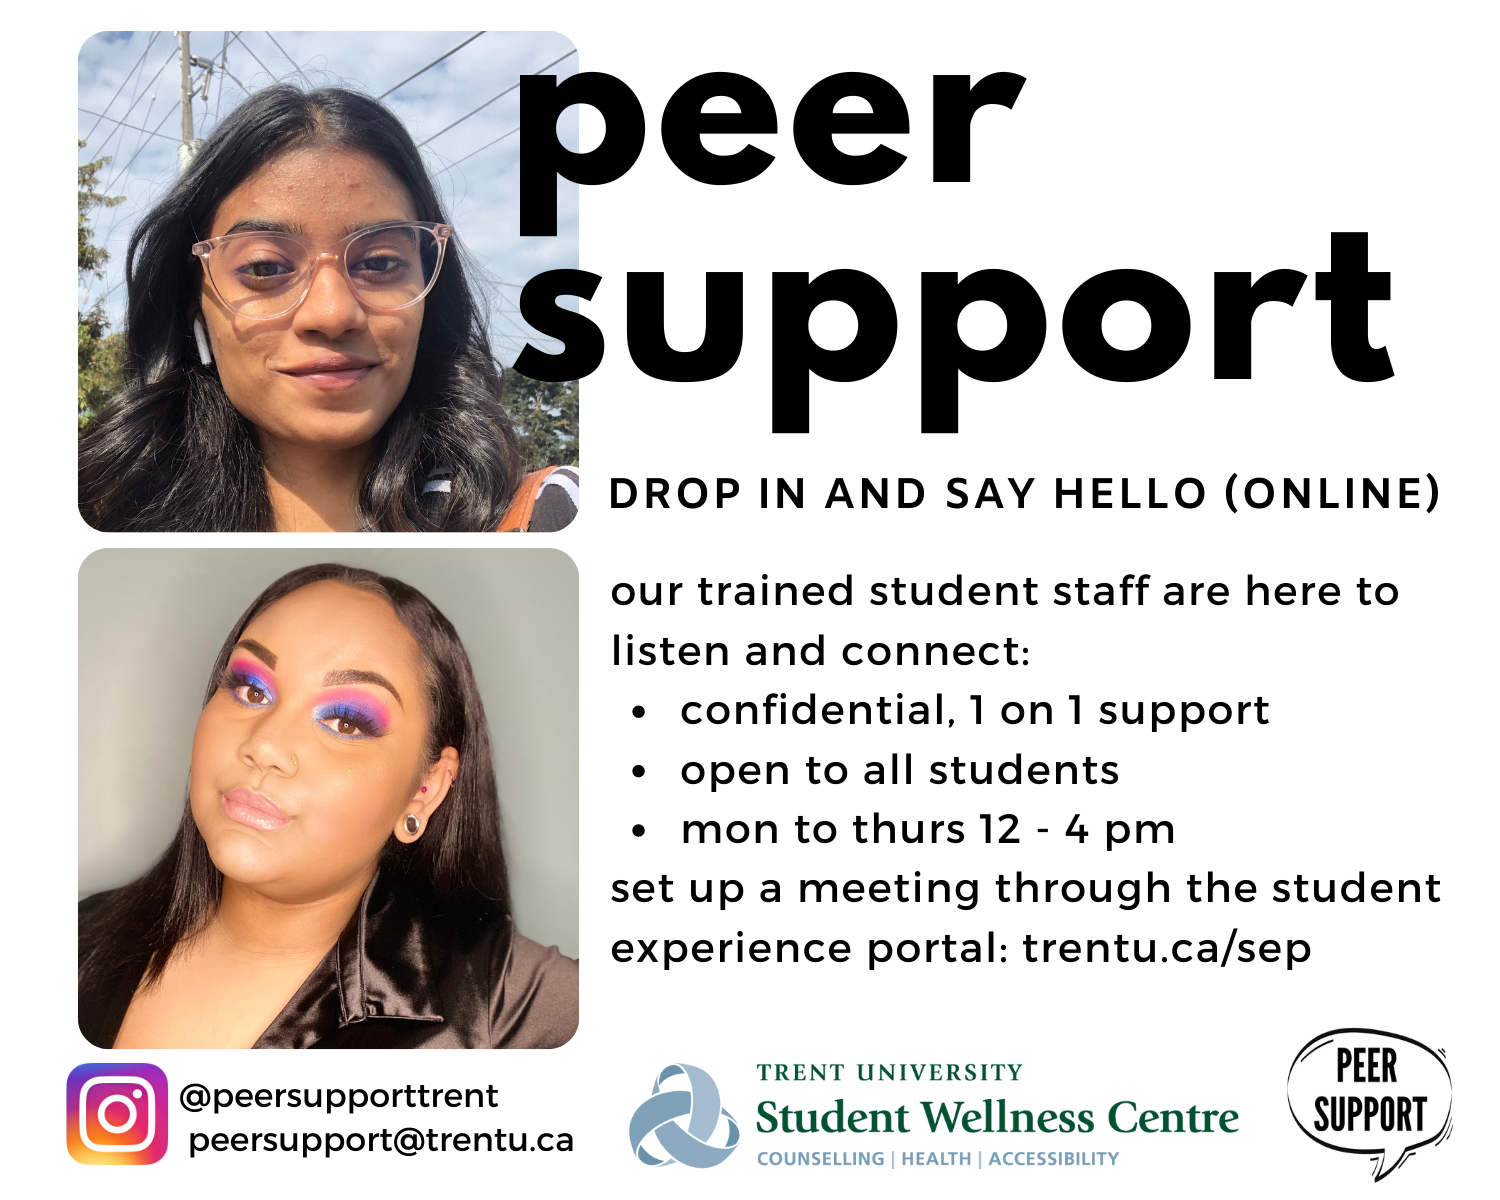 Peer Support. Drop in and say hello online. Our trained student staff are here to listen and connect with one on one support, open to all students, monday to thursday noon until four pm. Set up a meeting throught the student experience portal.